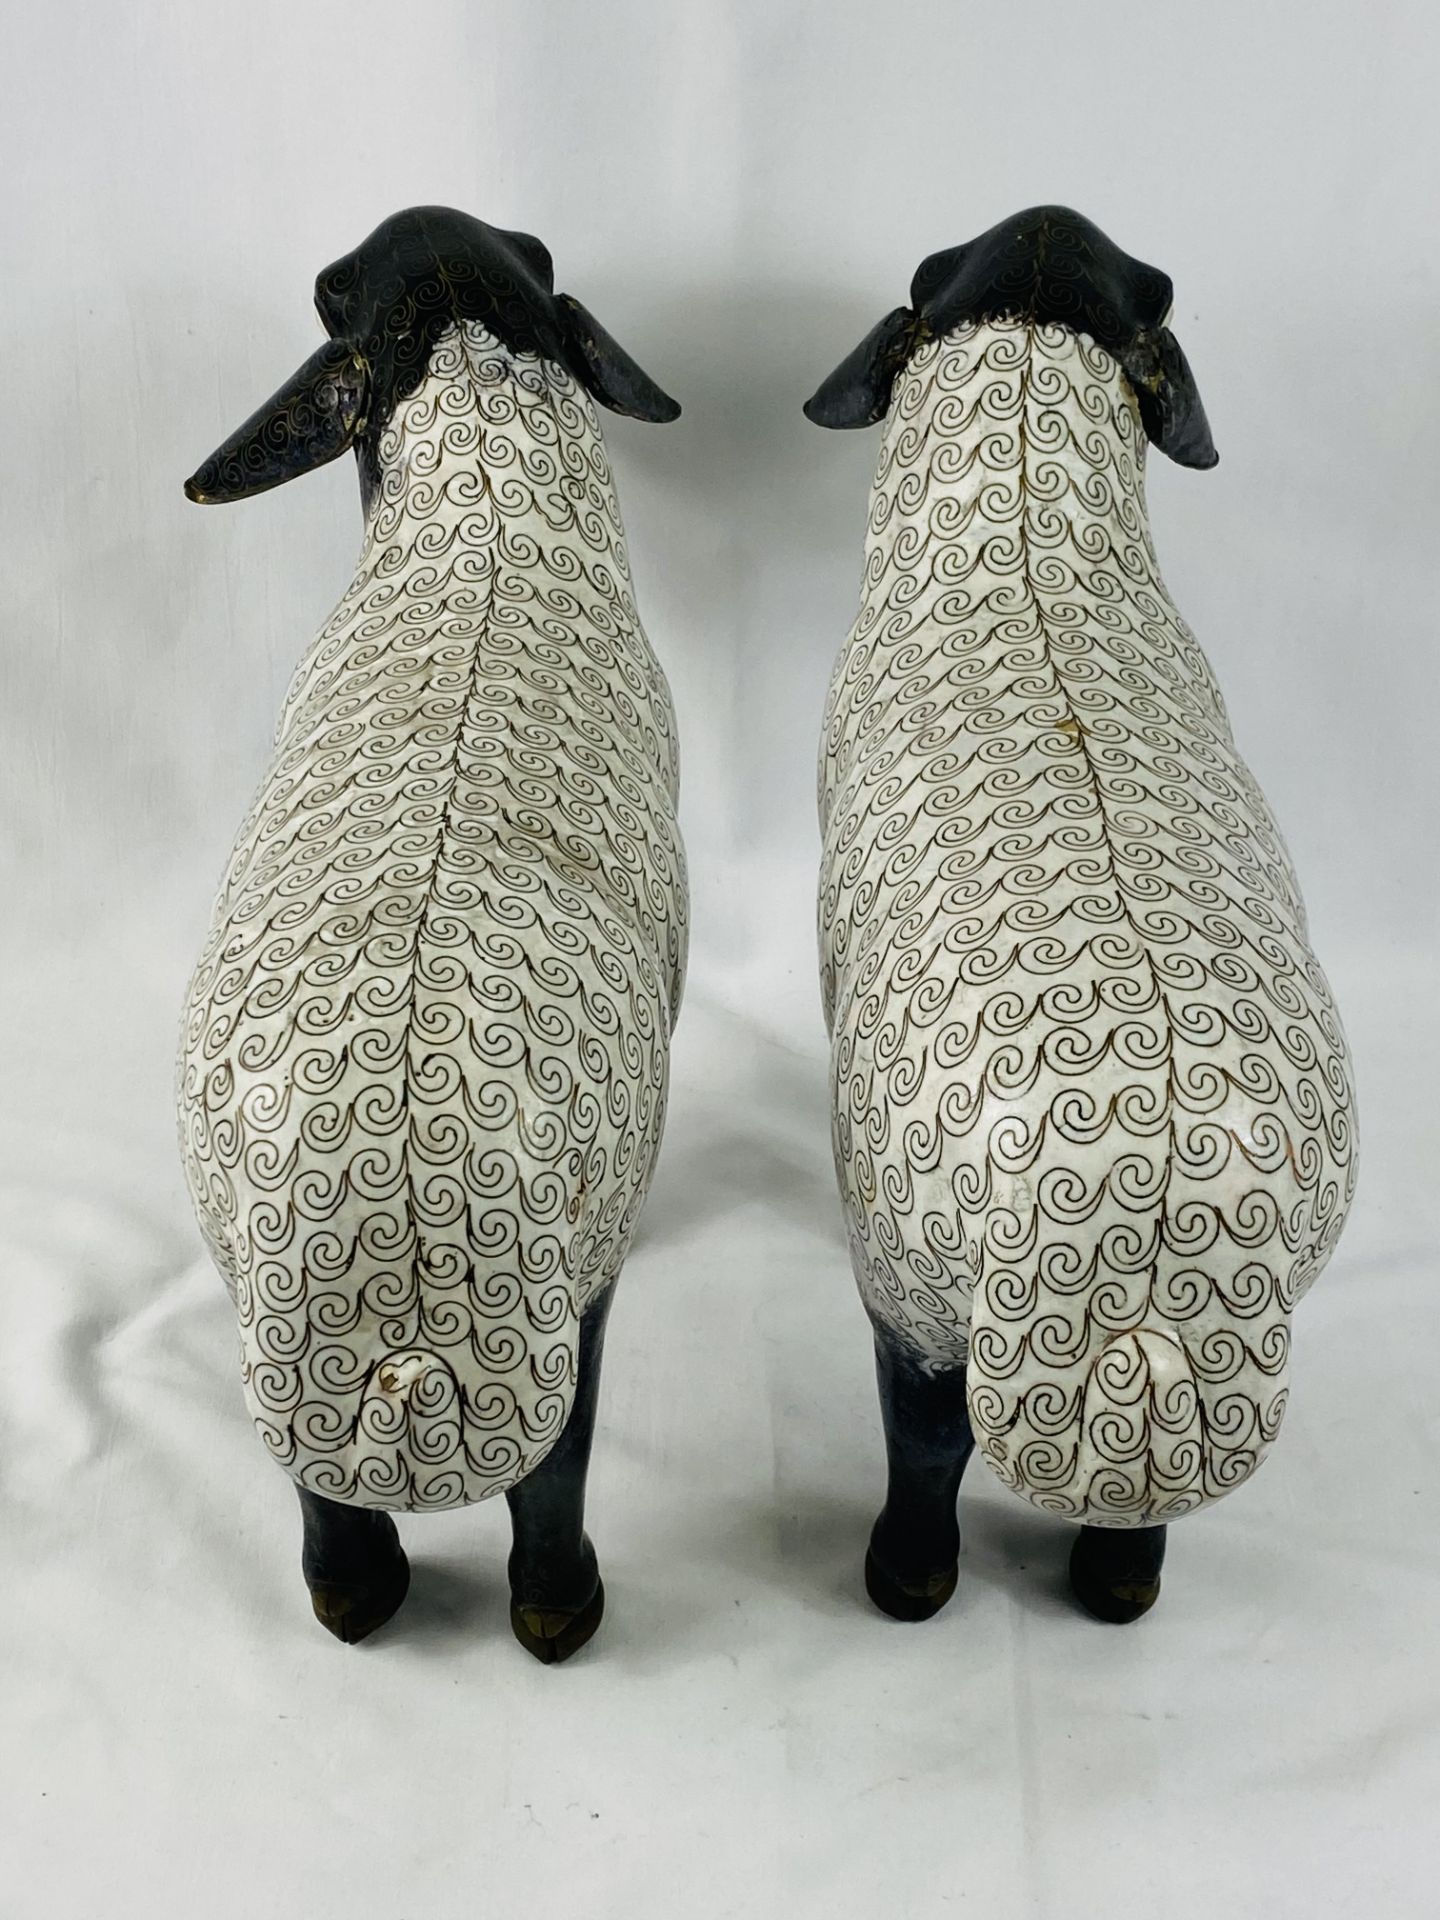 Two cloisonne sheep - Image 9 of 9